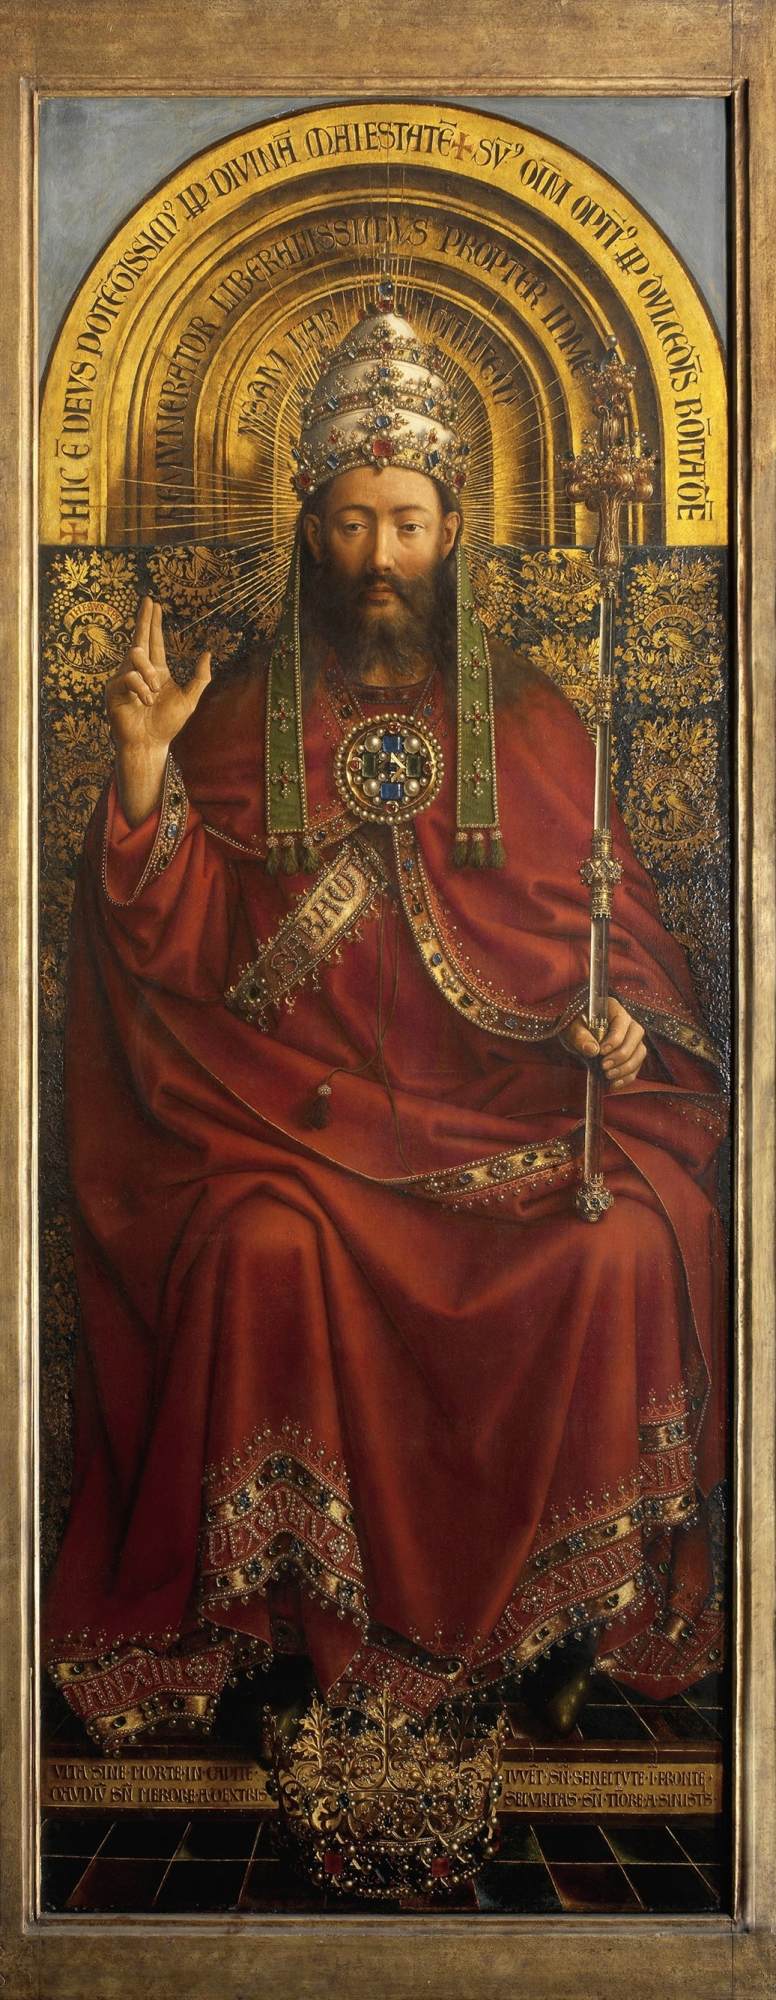 The Ghent Altarpiece: Almighty God